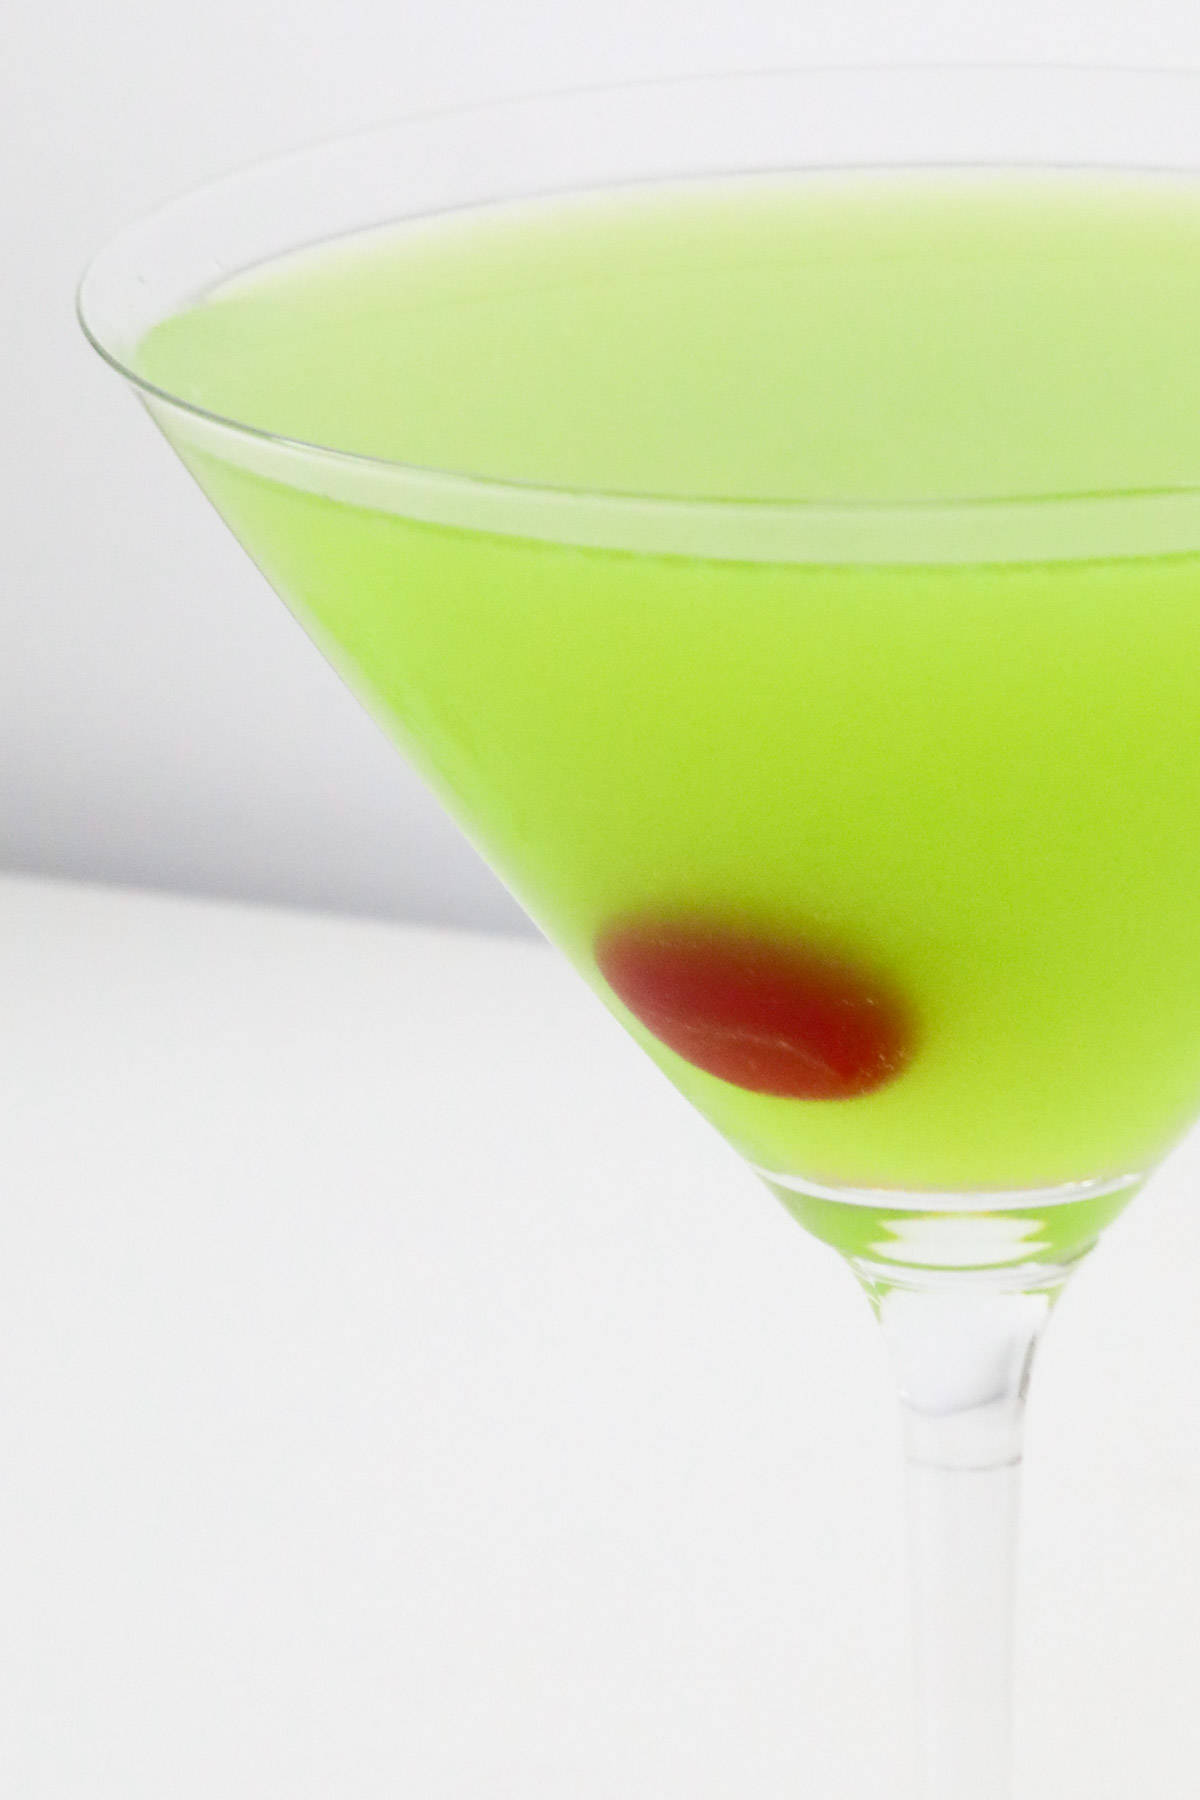 A Japanese Slipper pale green cocktail in a Martini glass, with a cherry in it.